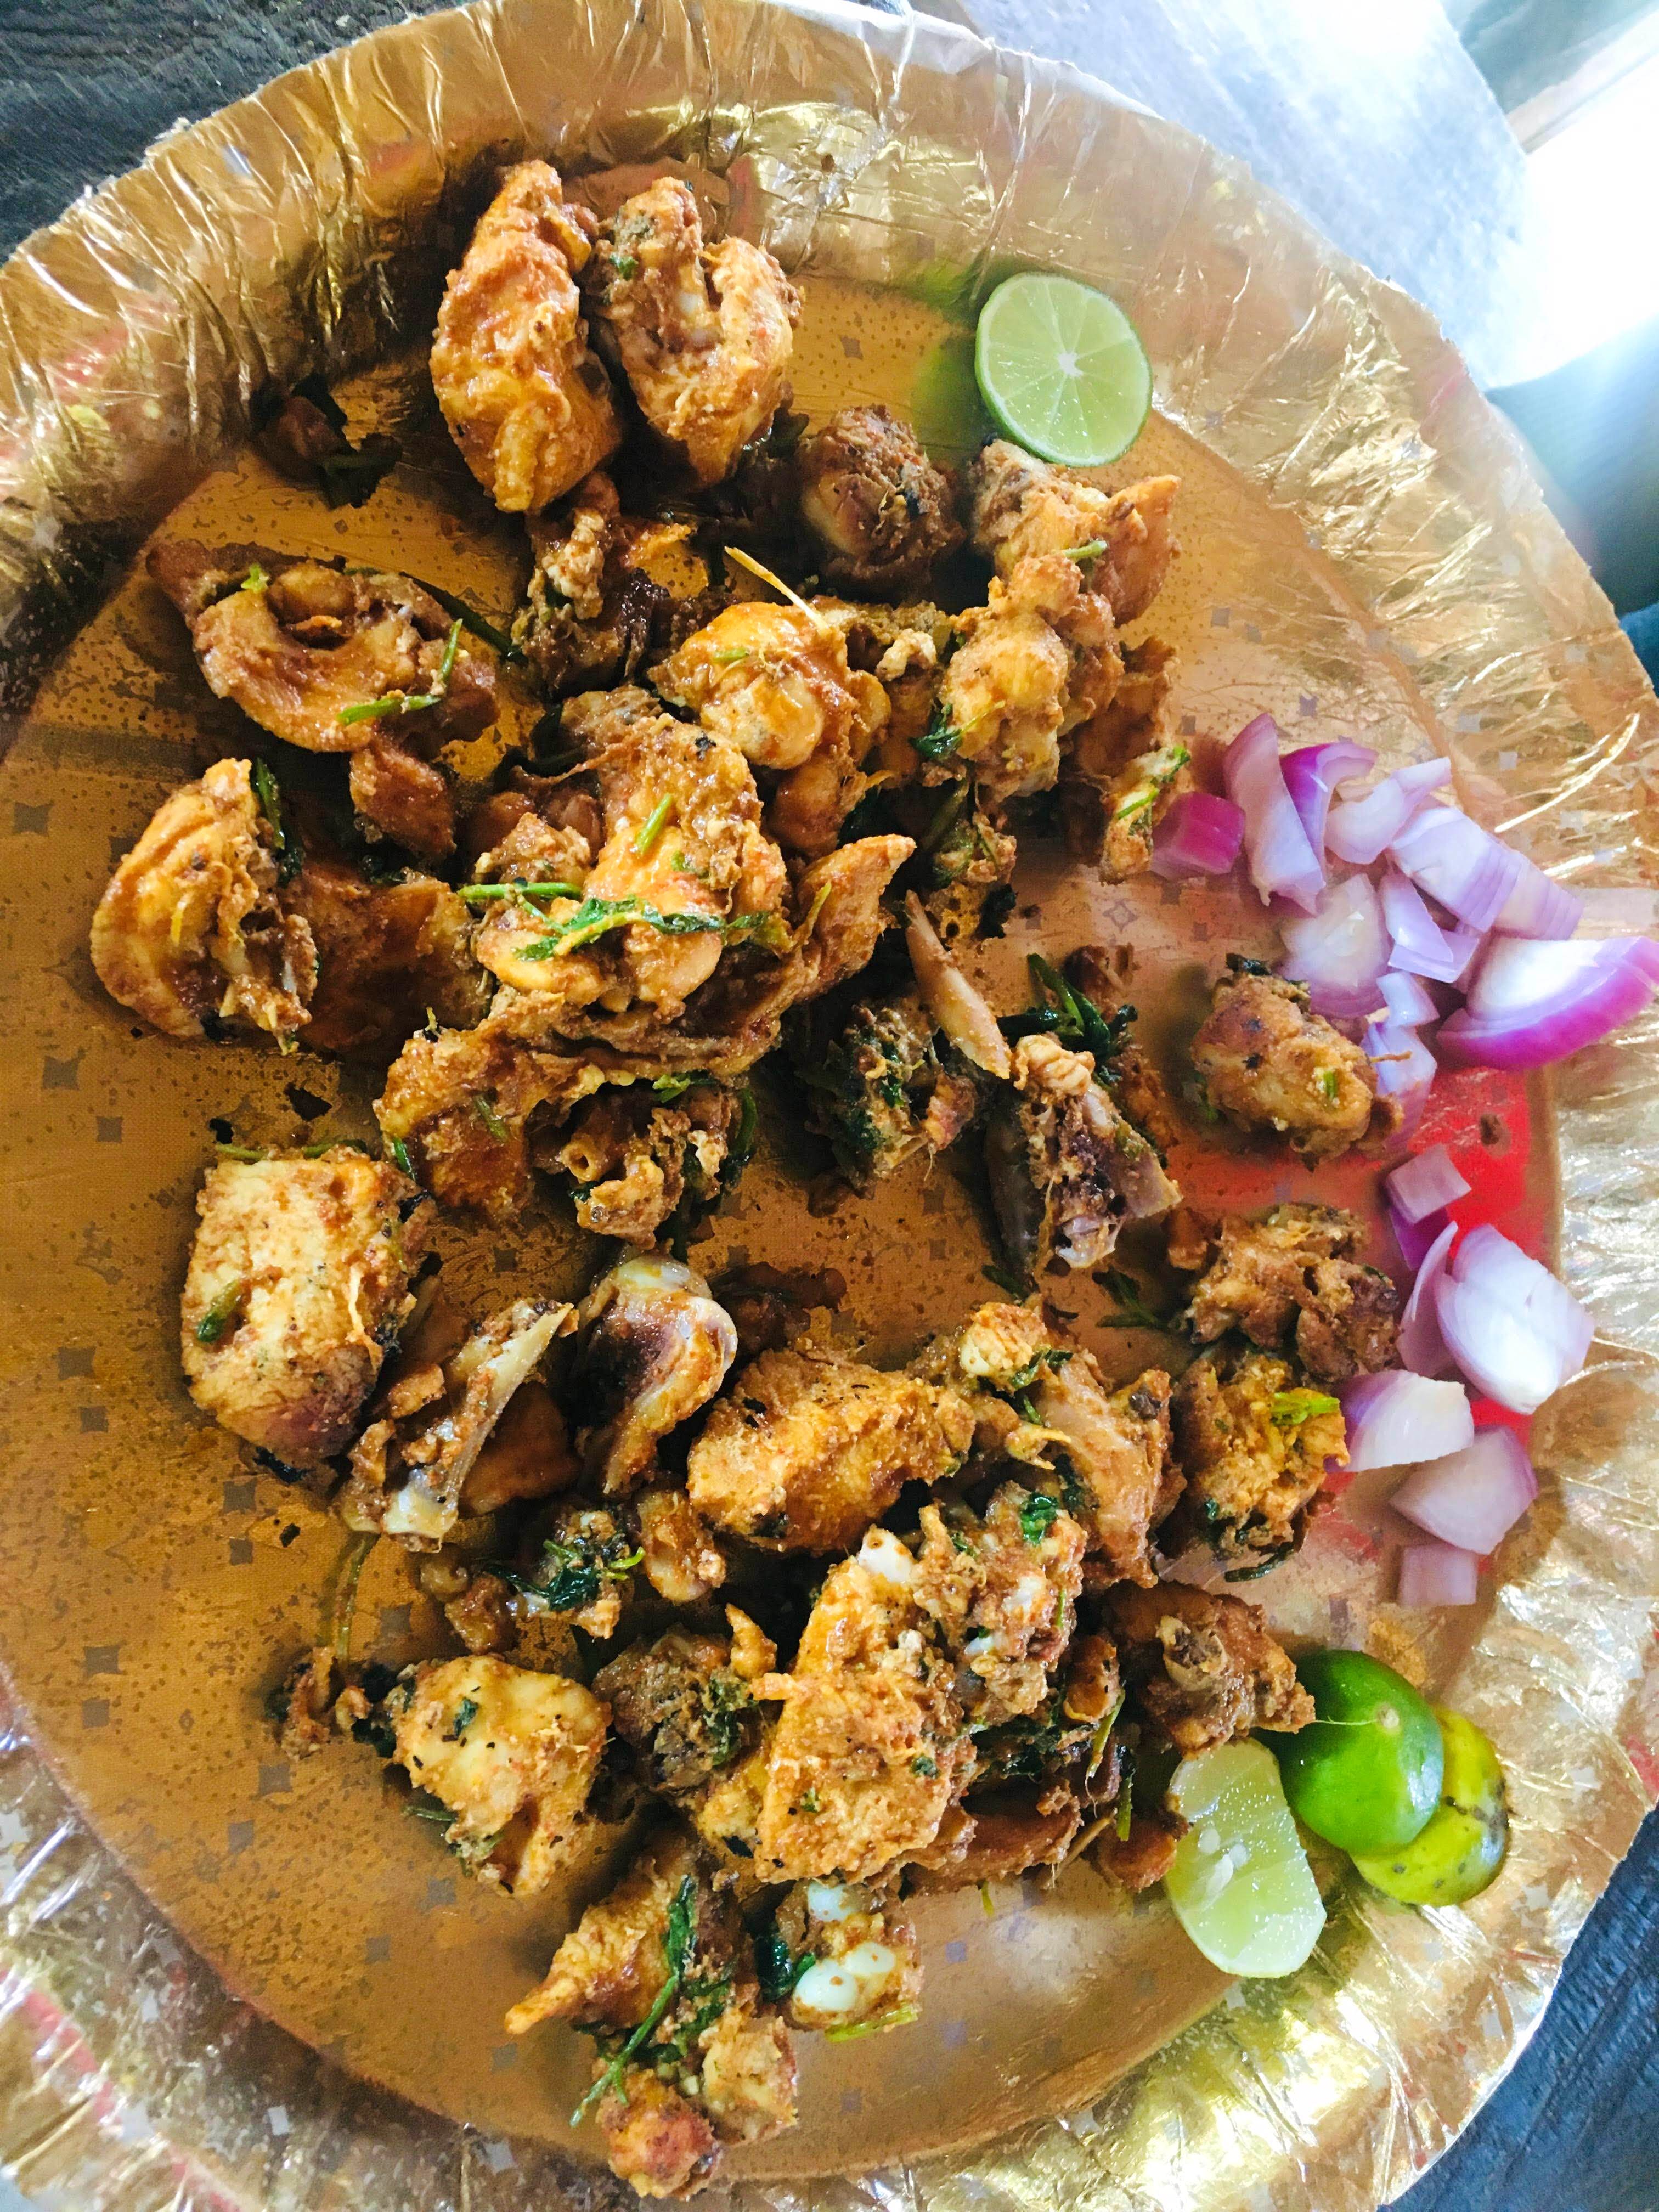 Dish,Food,Cuisine,Ingredient,Produce,Meat,Recipe,Chicken meat,Fried food,Indian cuisine